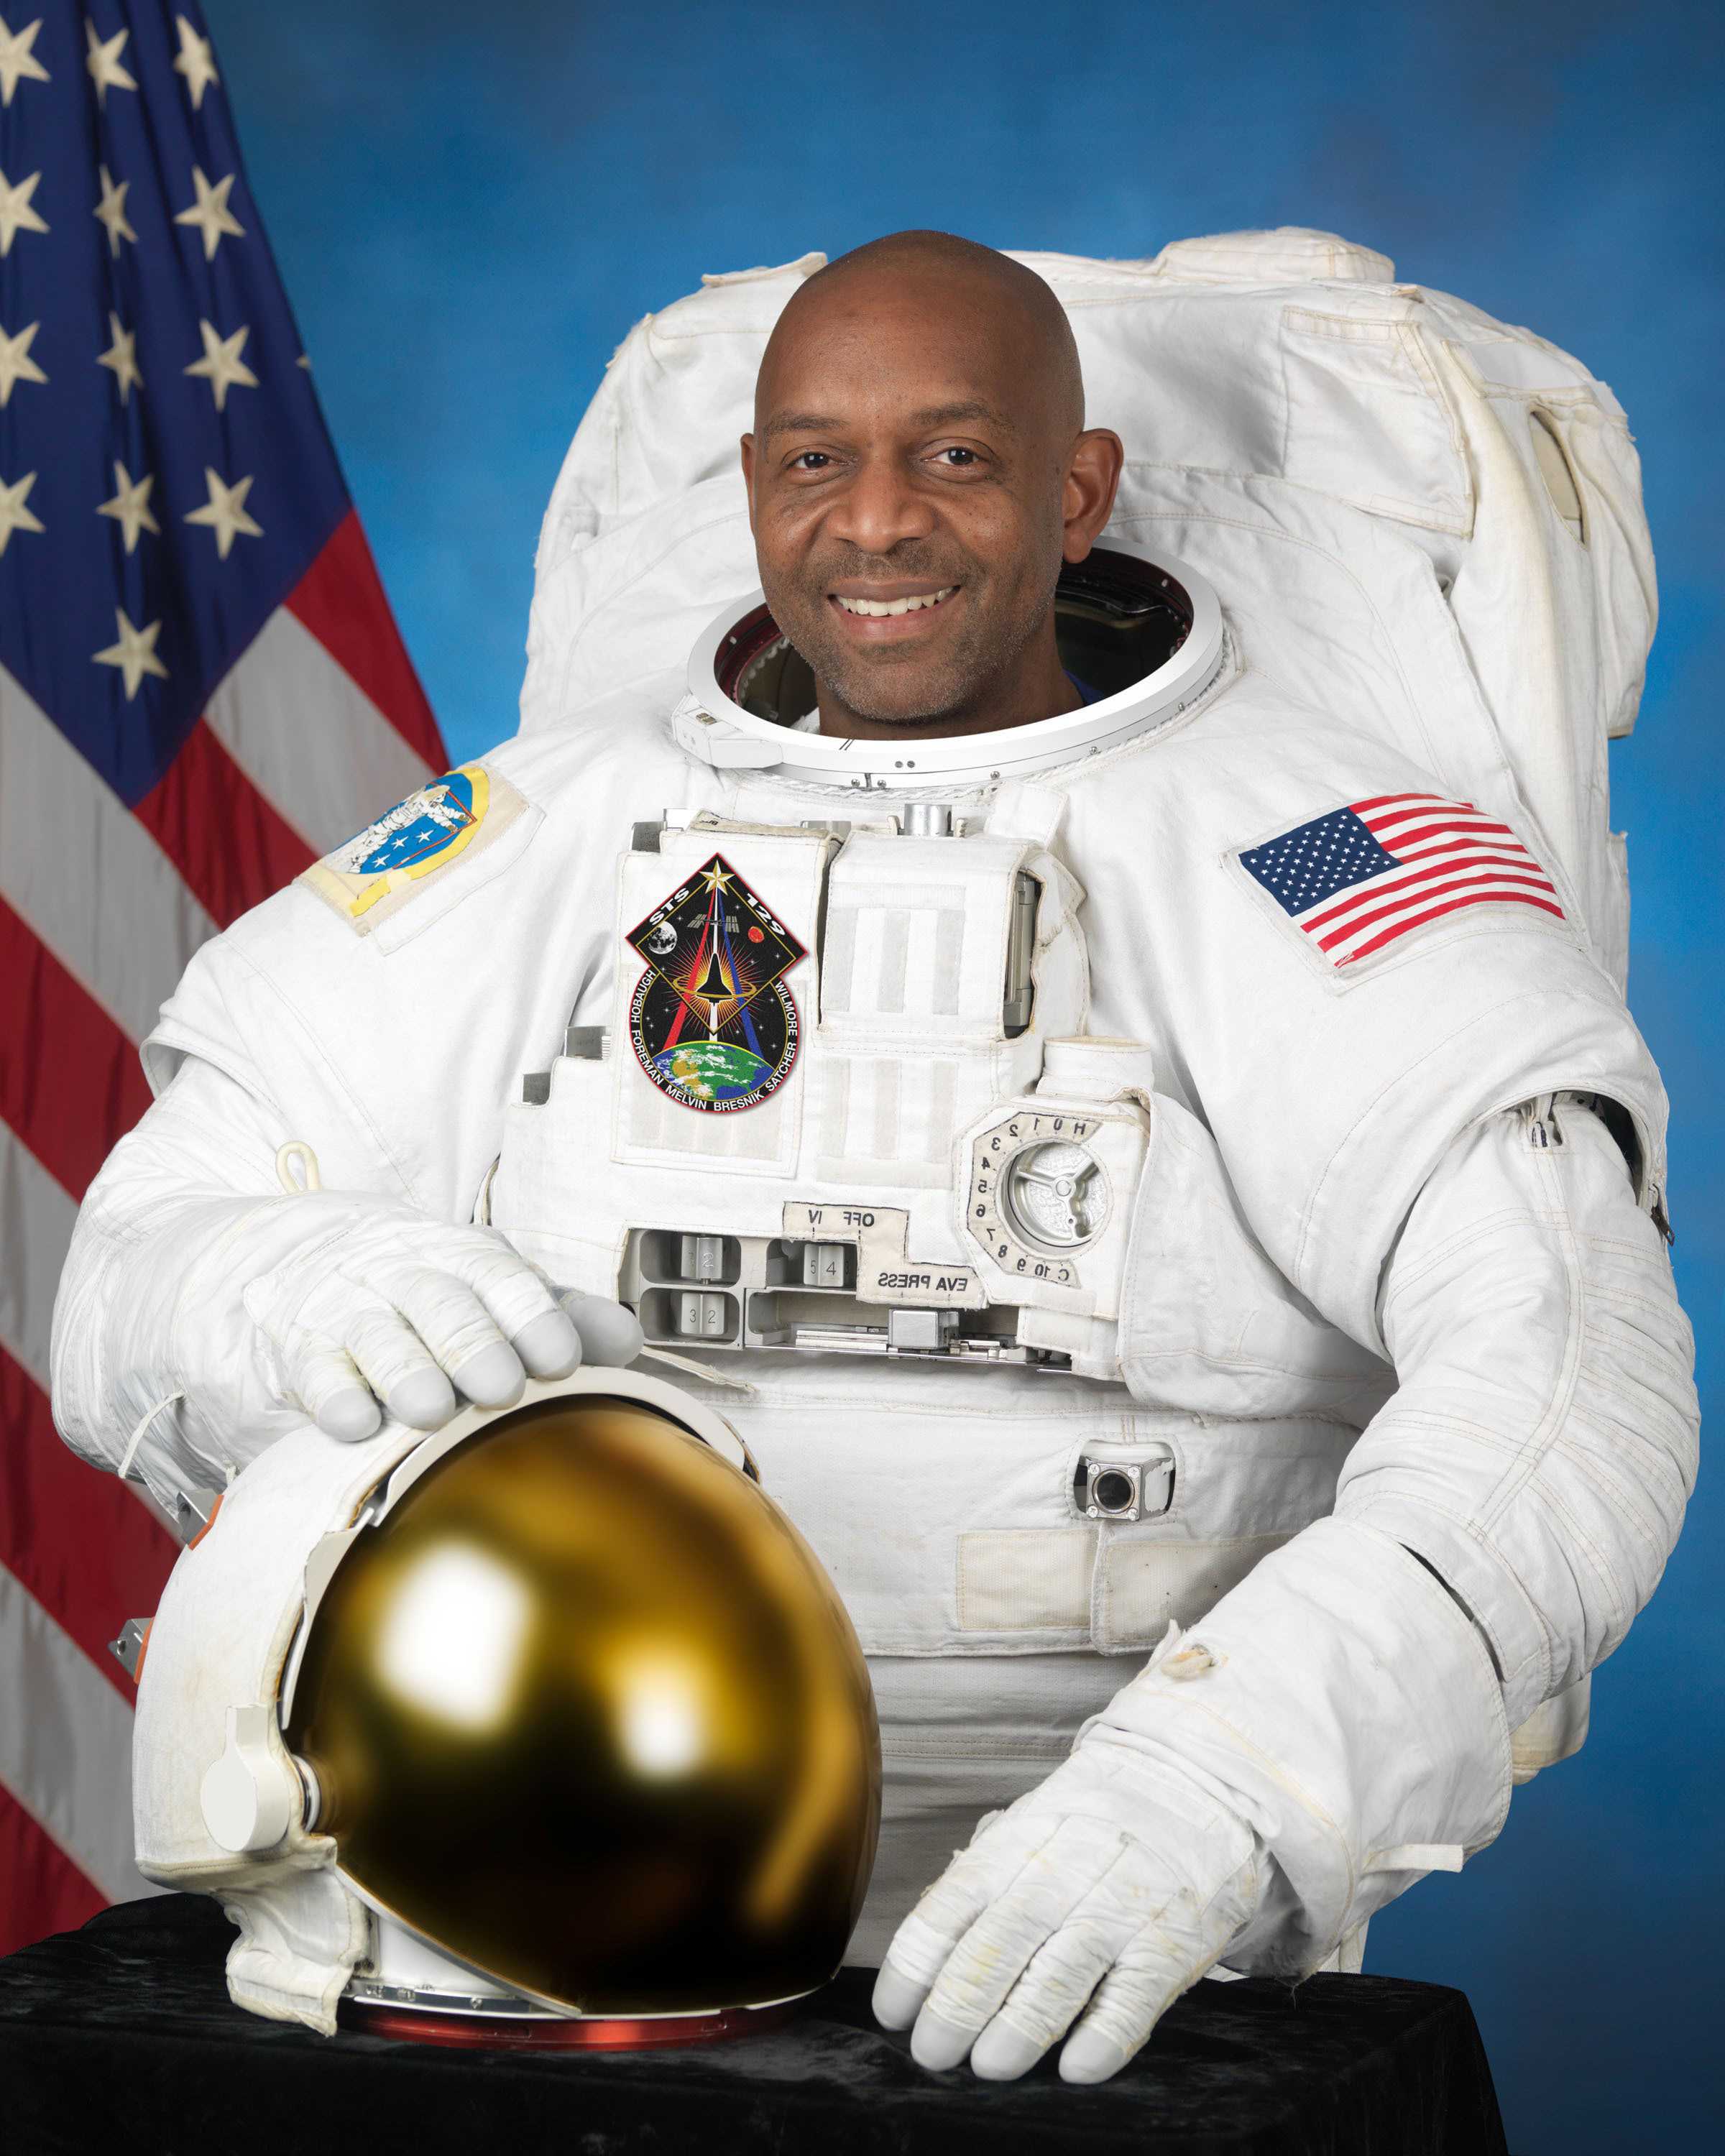 Robert Satcher poses for his portrait in a white NASA space suit while holding a helmet.